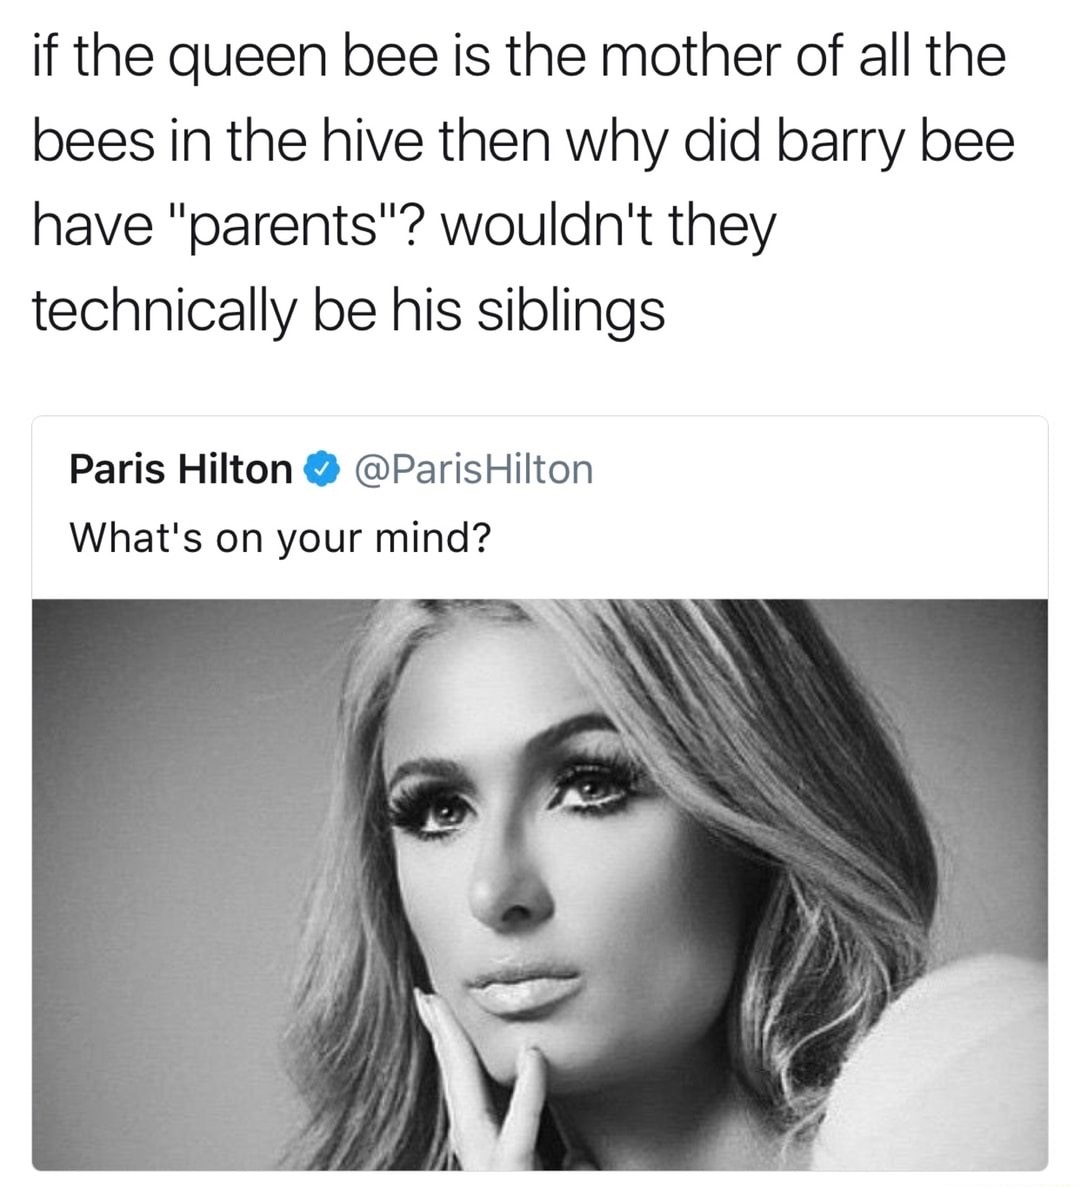 dank meme london tipton paris hilton - if the queen bee is the mother of all the bees in the hive then why did barry bee have "parents"? wouldn't they technically be his siblings Paris Hilton Hilton What's on your mind?